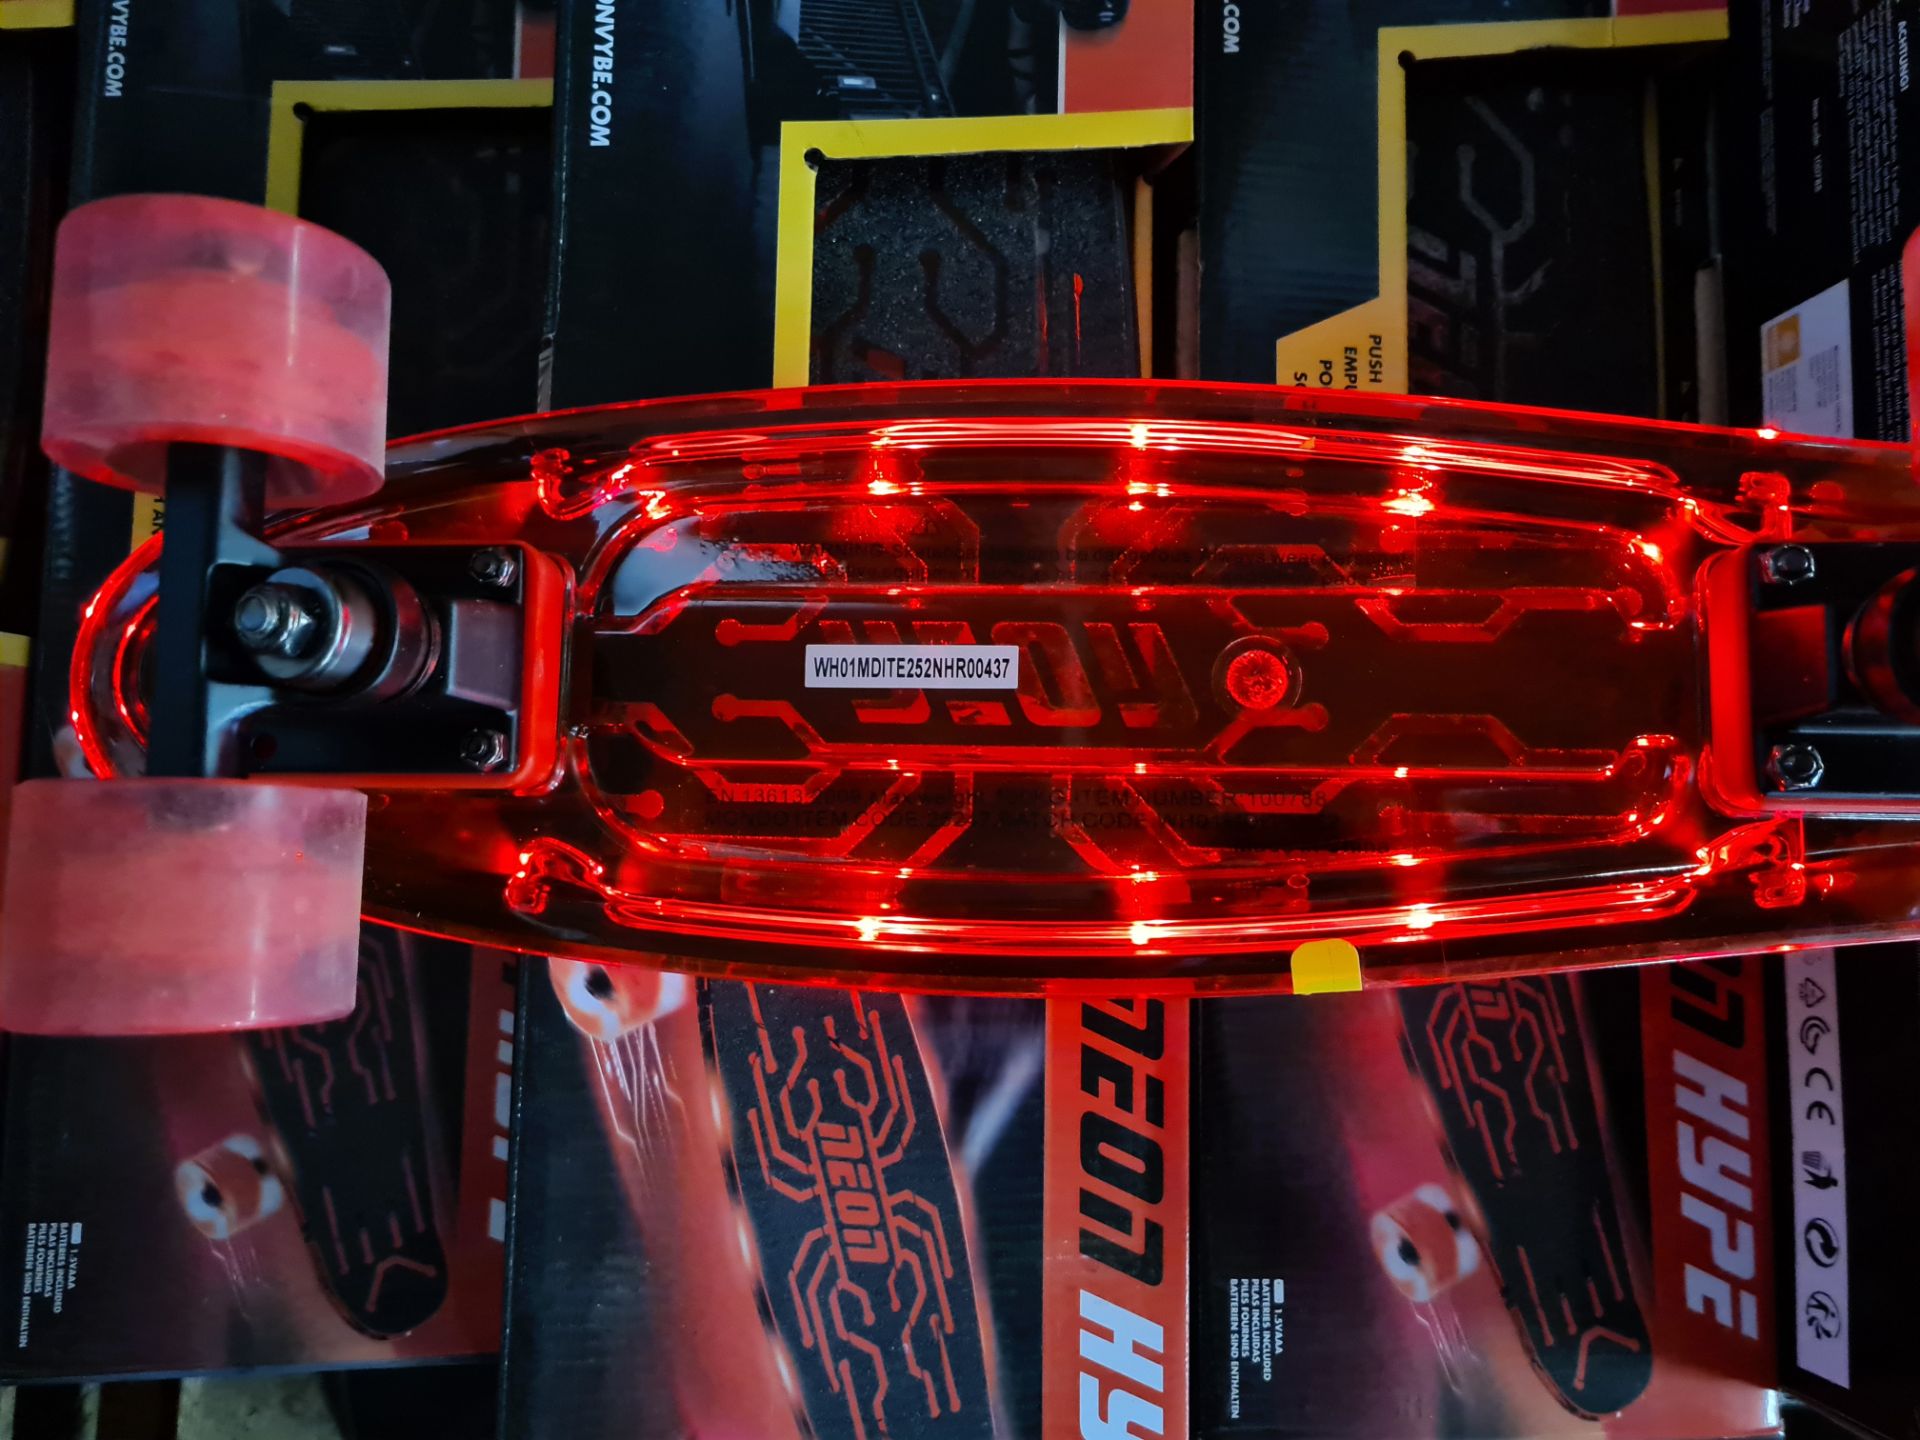 Neon Hype Skateboard with LED Light-up Function | RRP £39.99 - Image 3 of 4